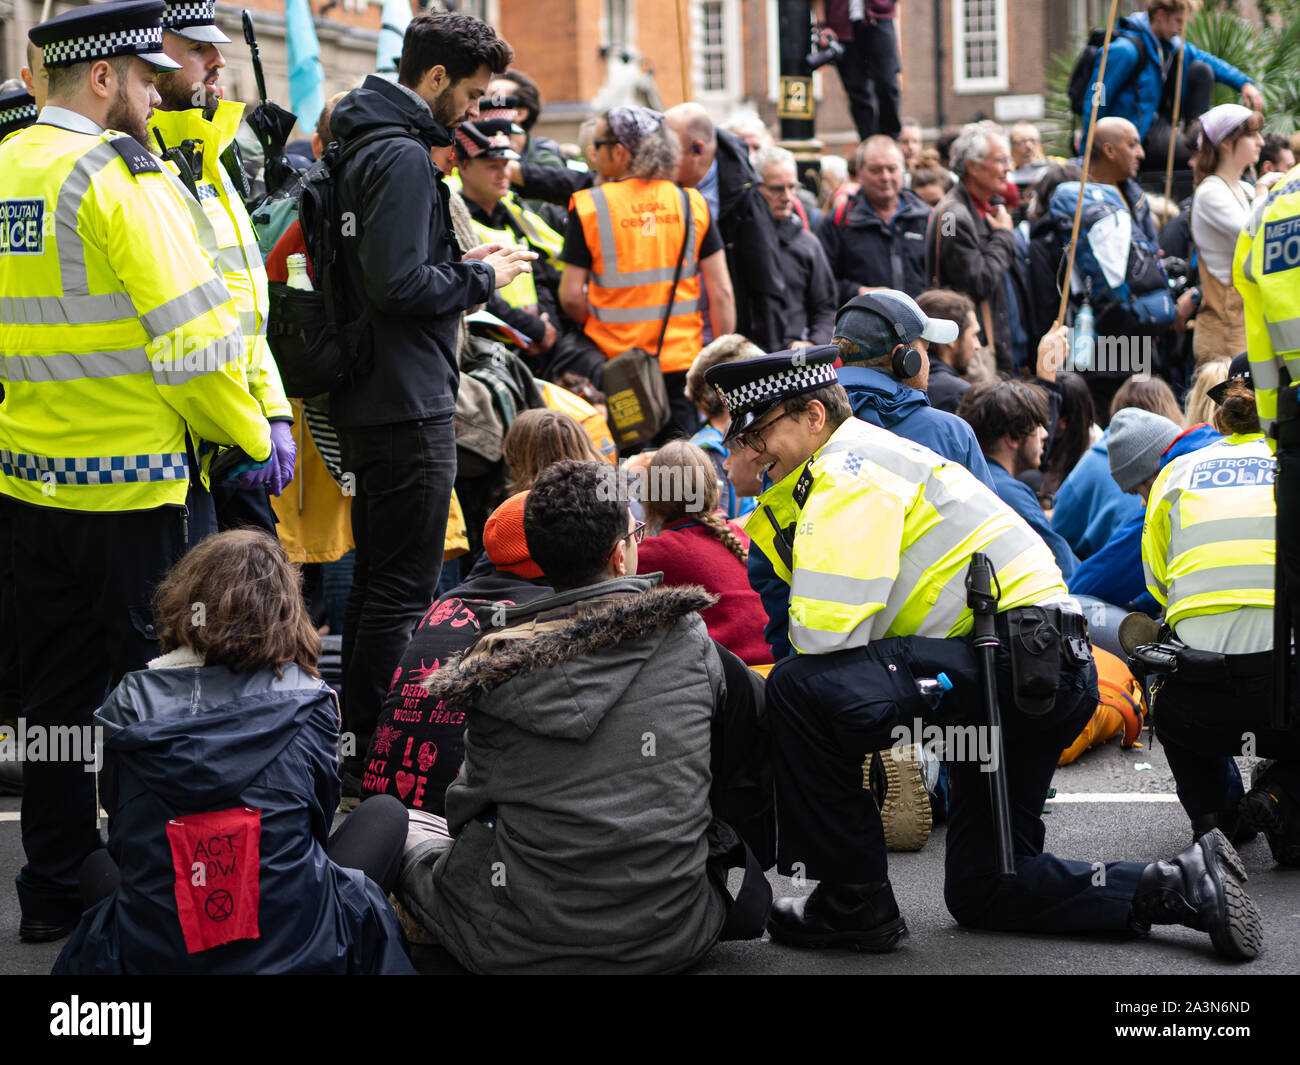 A policeman is smiling while chatting with the Extinction Rebellion demonstrators. Stock Photo